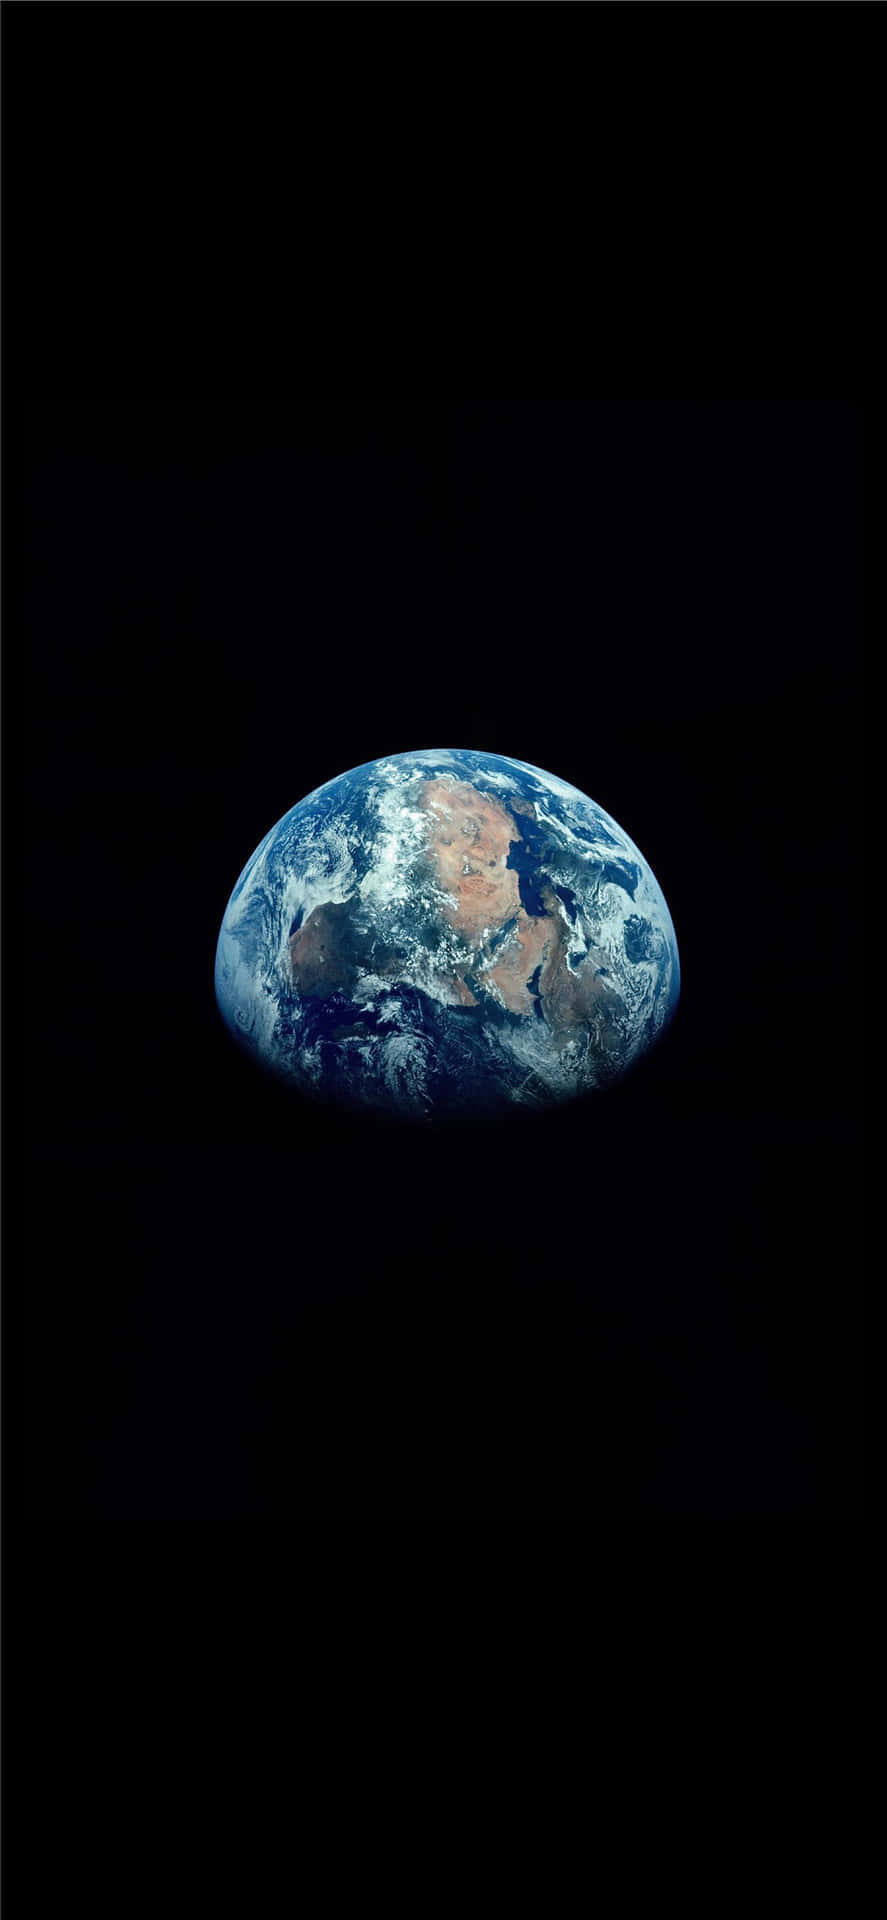 A Black And White Image Of The Earth